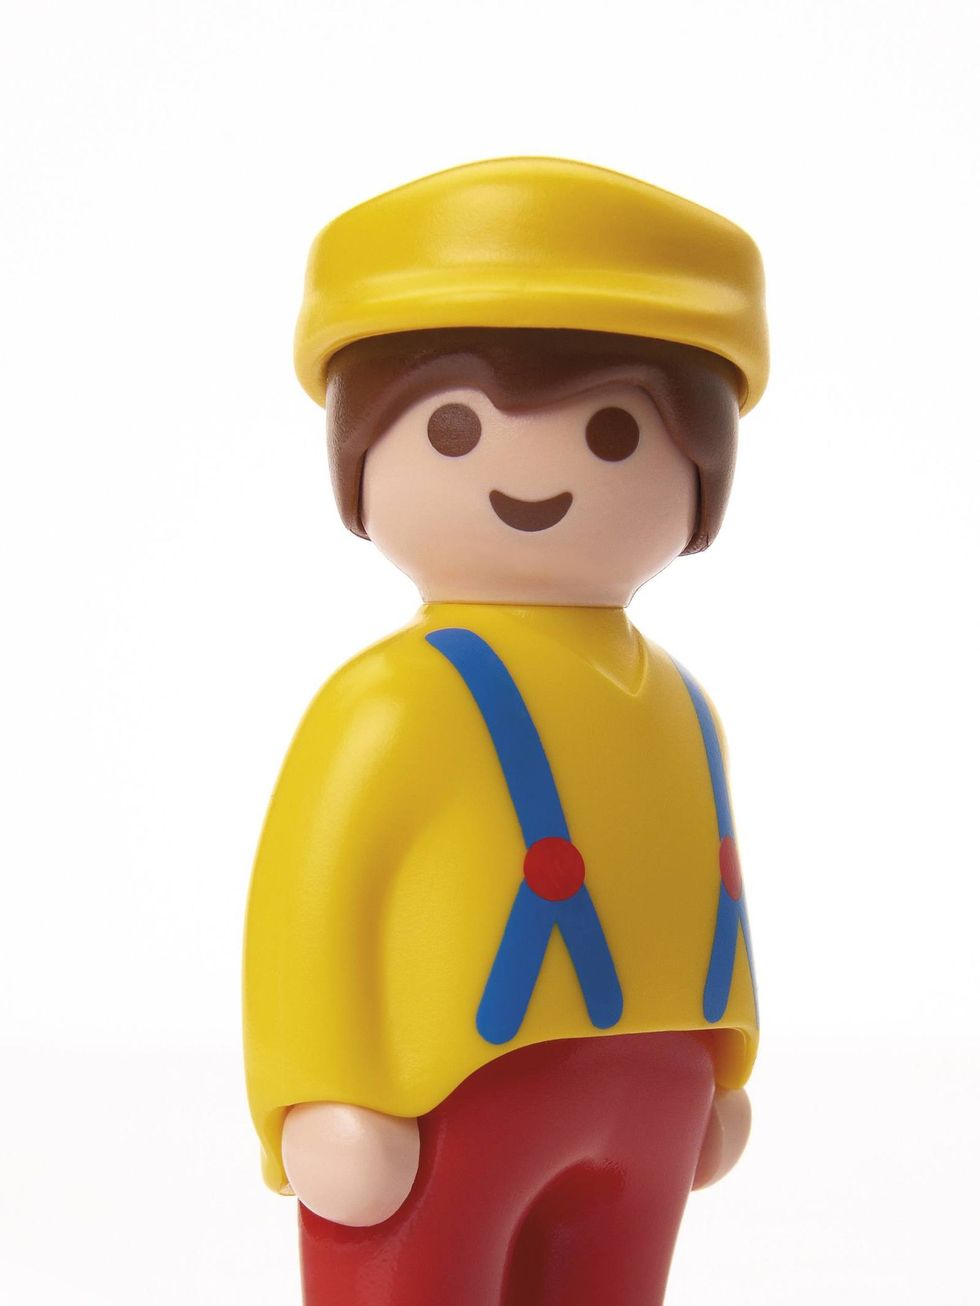 Standing, Toy, Joint, Costume accessory, Plastic, Fictional character, Costume hat, Lego, Collectable, Figurine, 